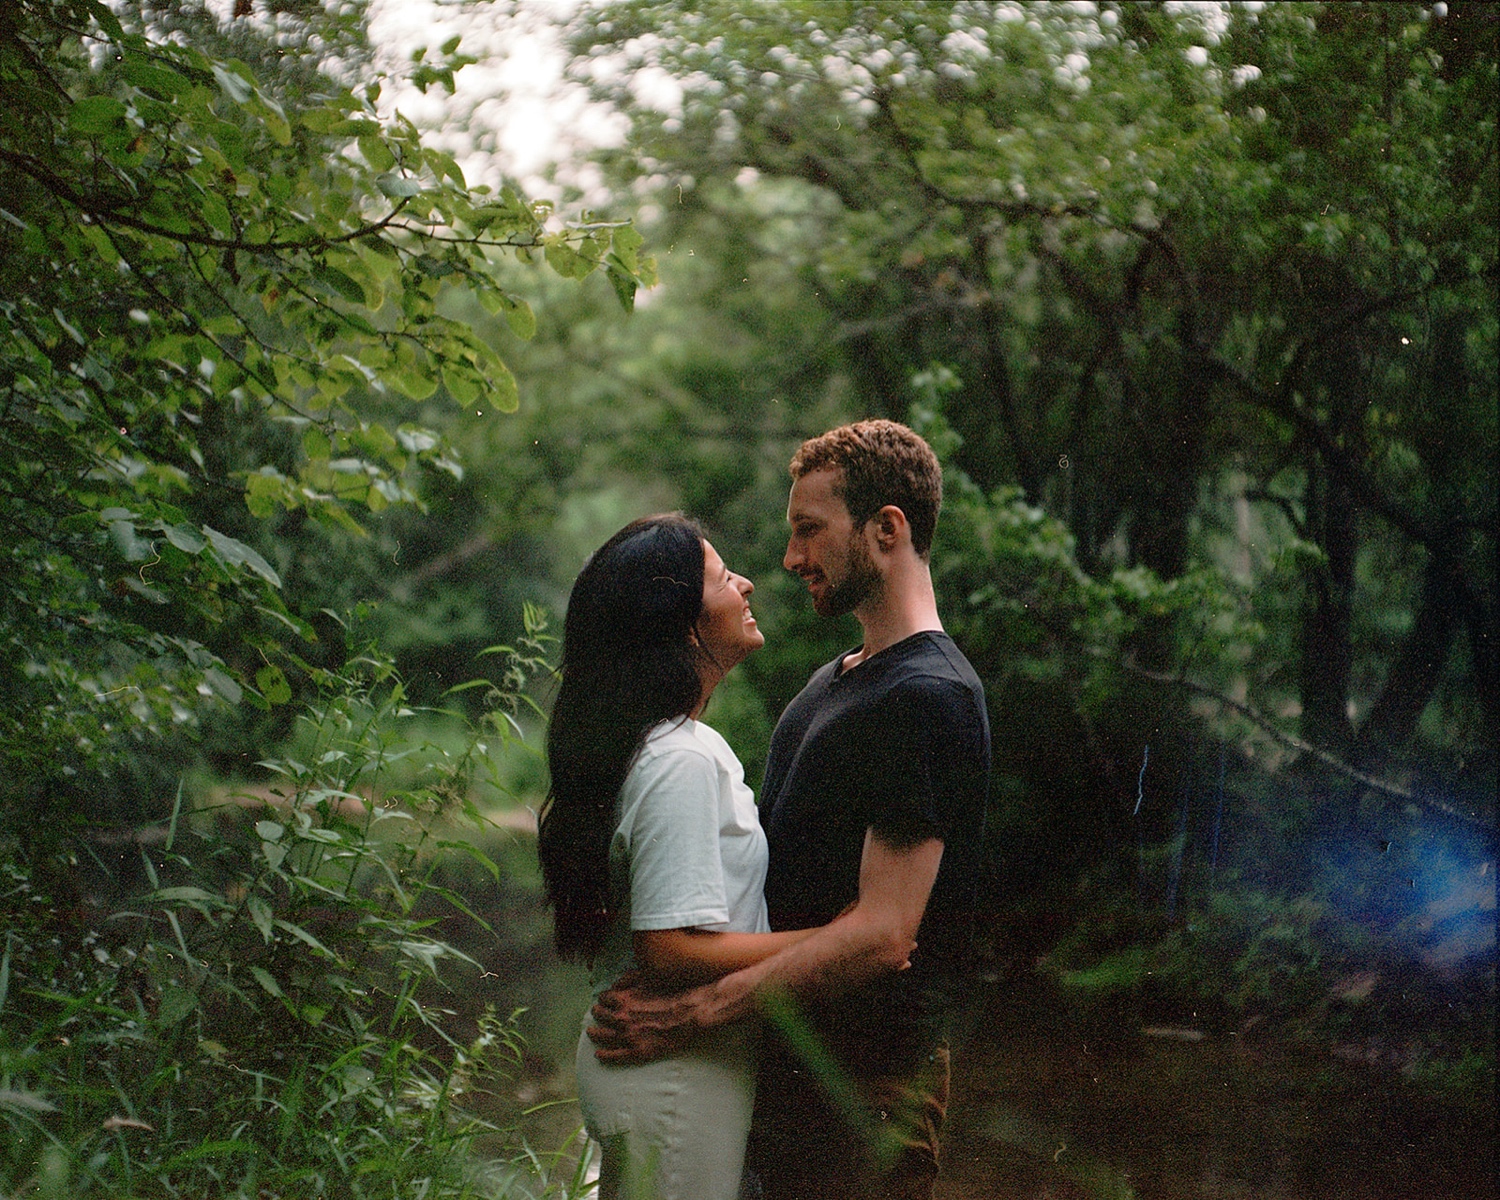 Mamiya Rb67 photos on portra 400. Couples photos on film at Willow River state park.